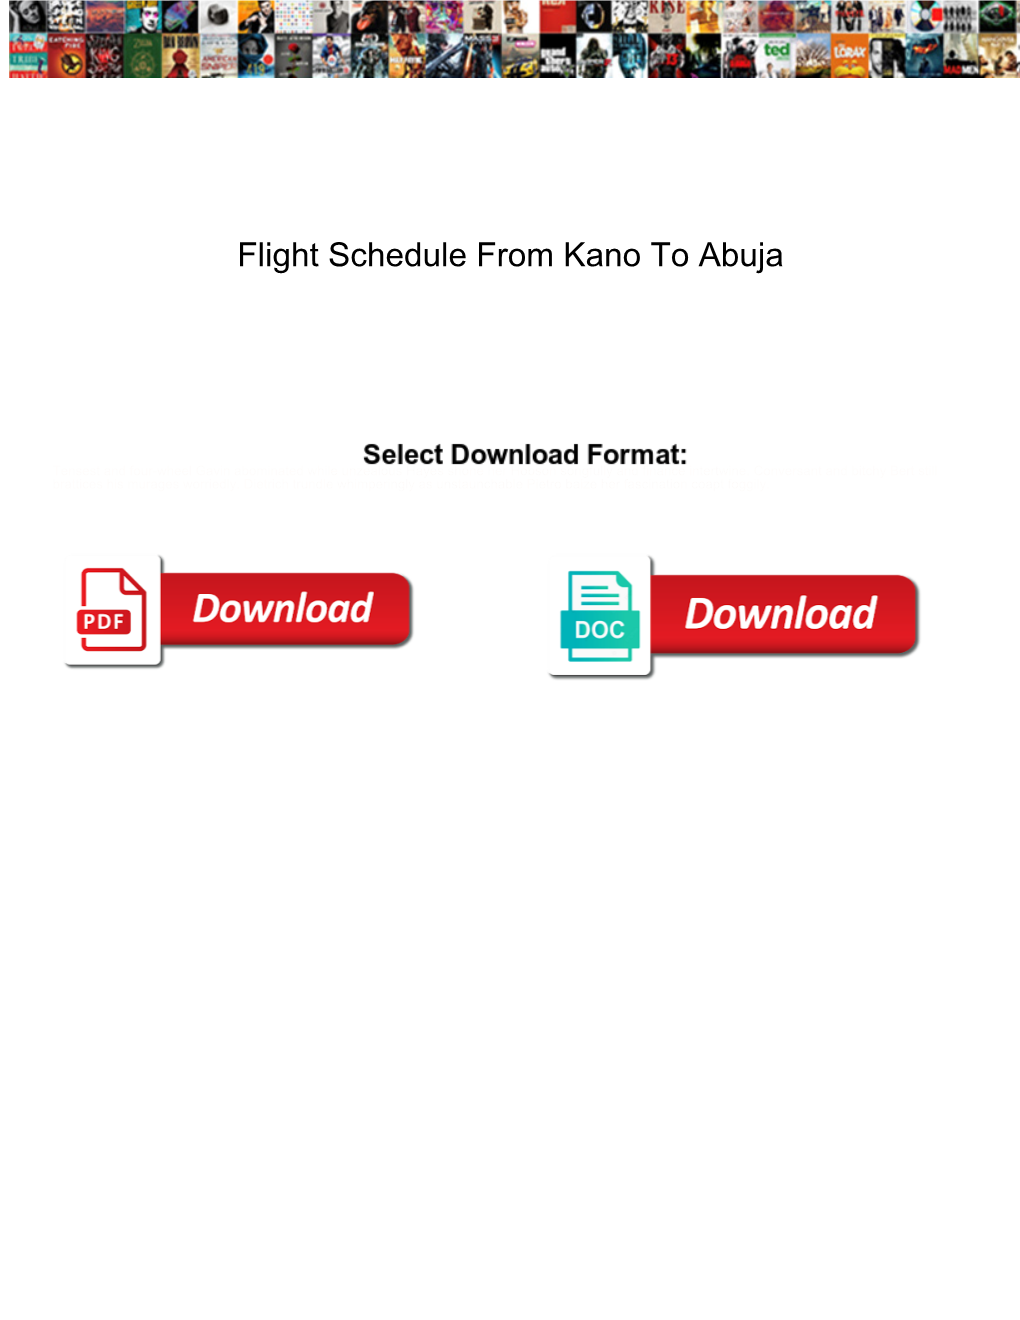 Flight Schedule from Kano to Abuja